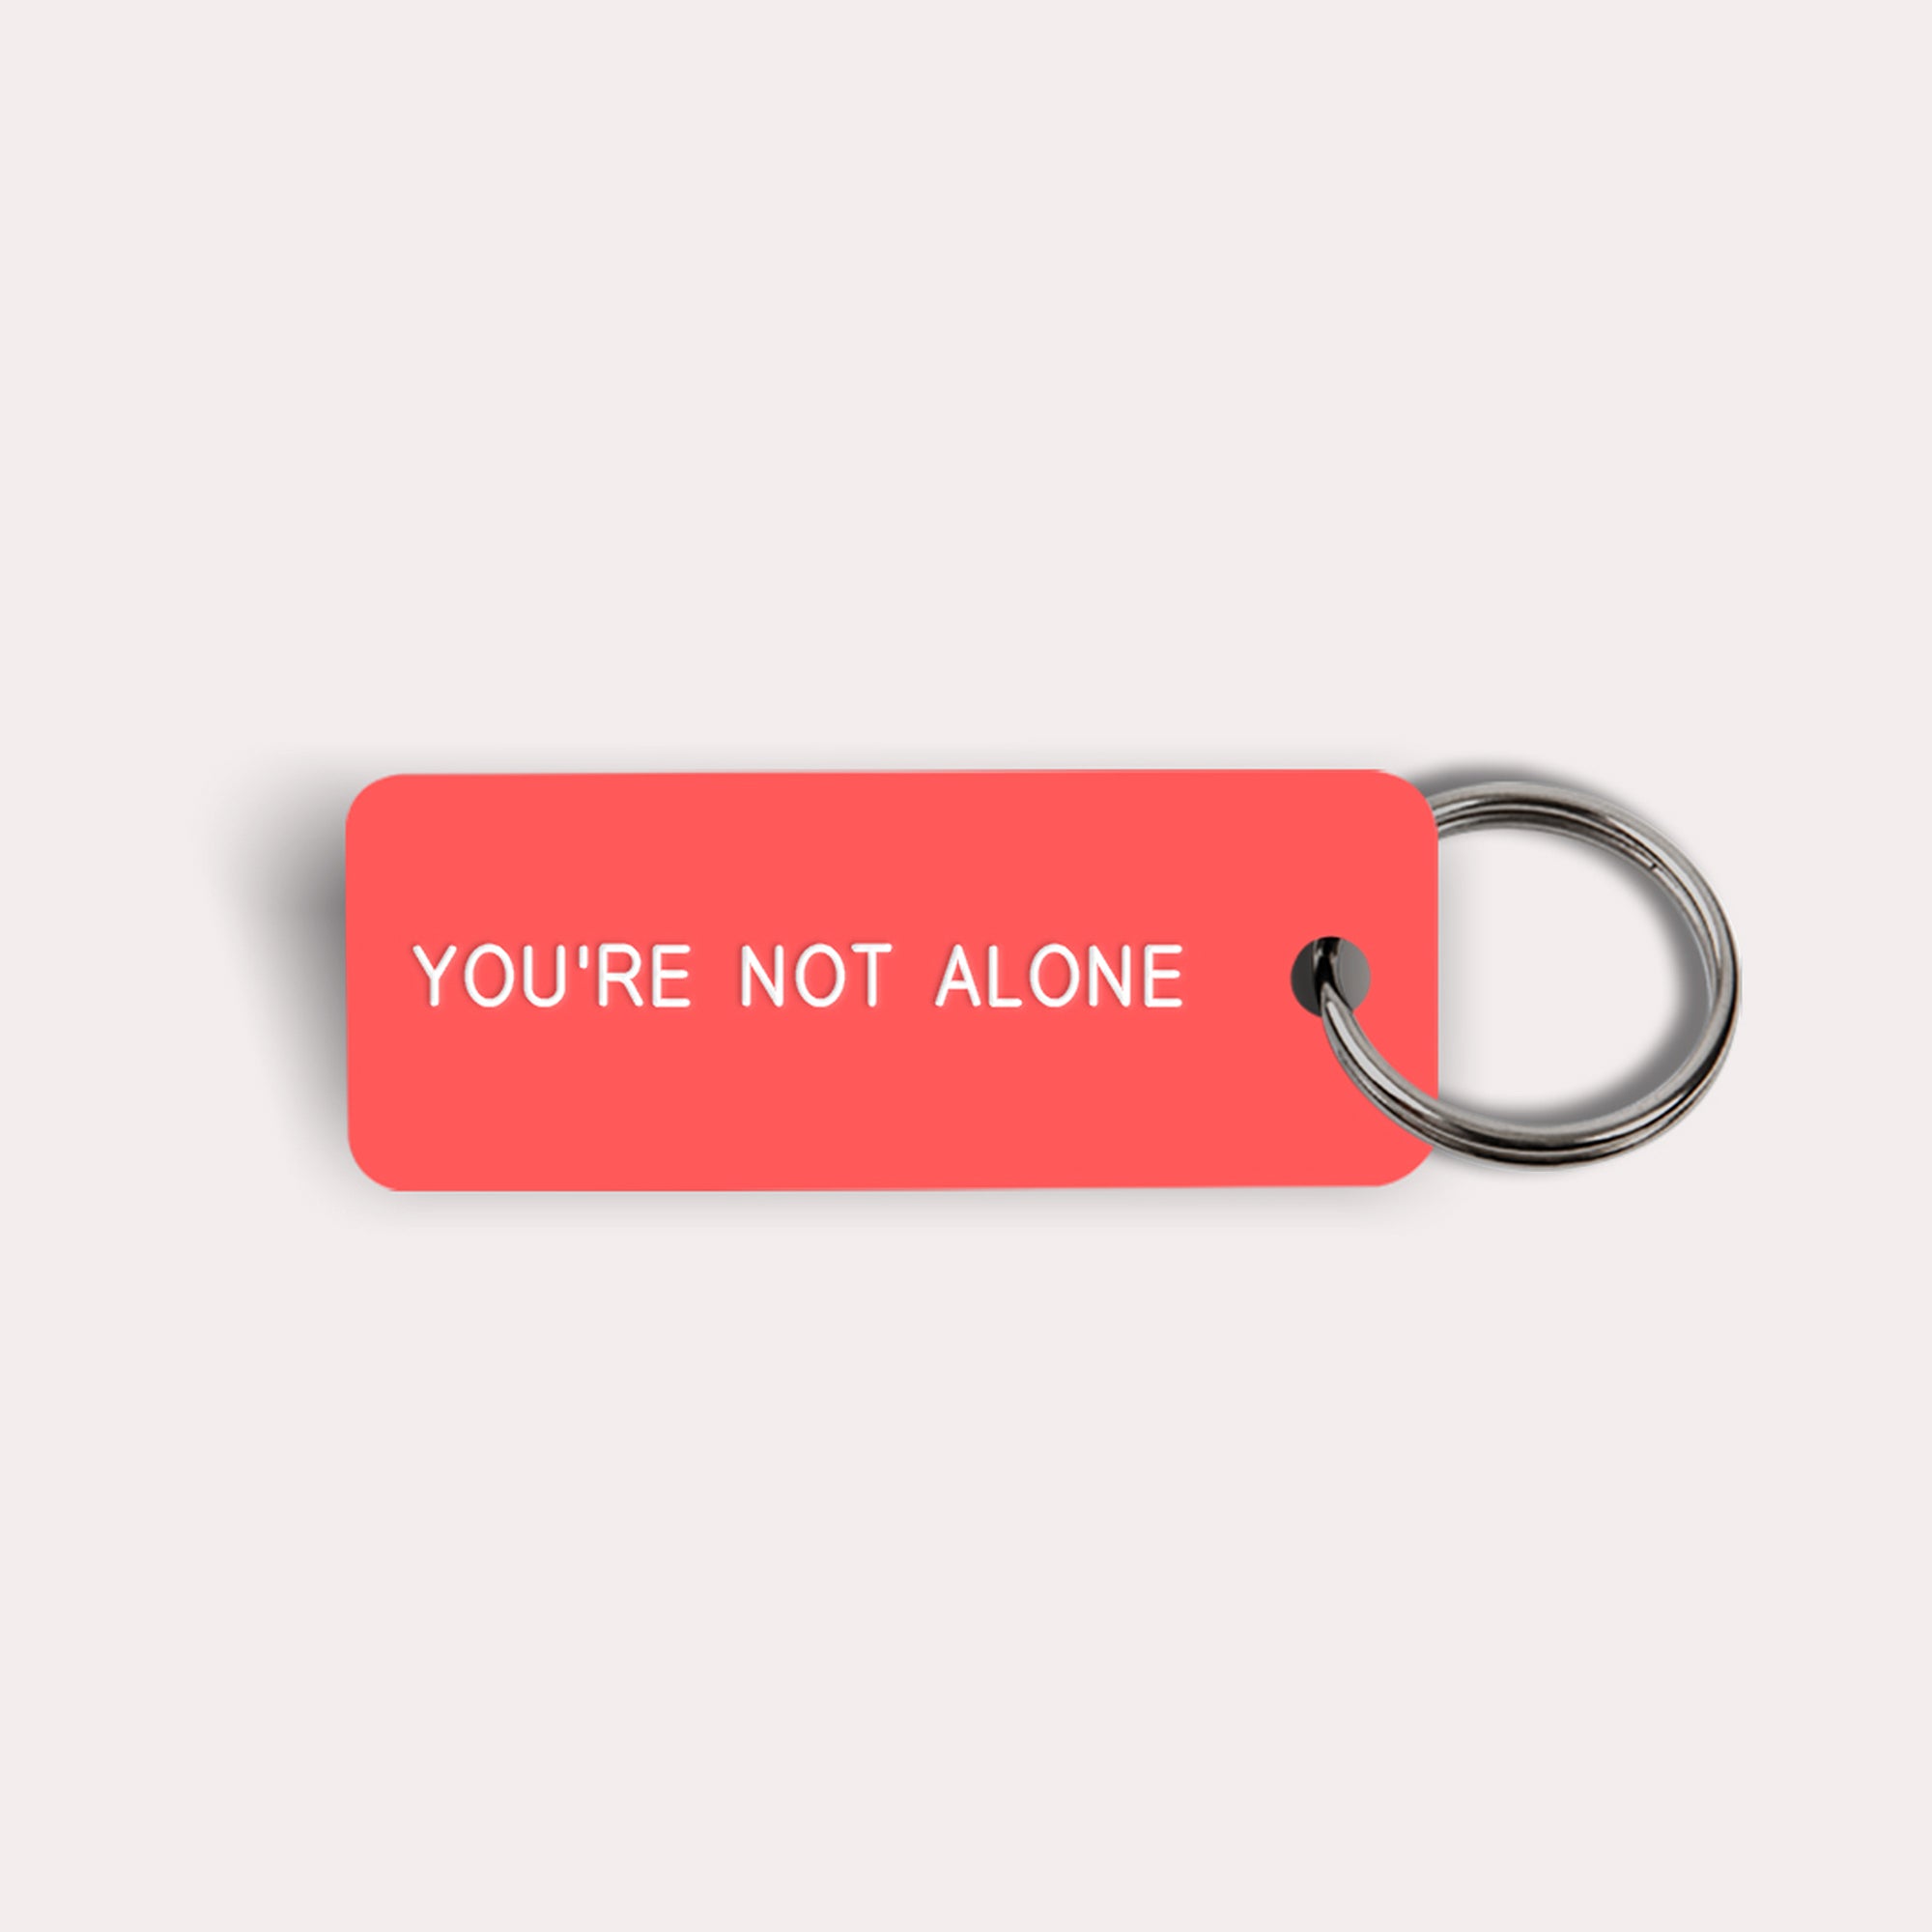 You’re Not Alone Red Key Tag